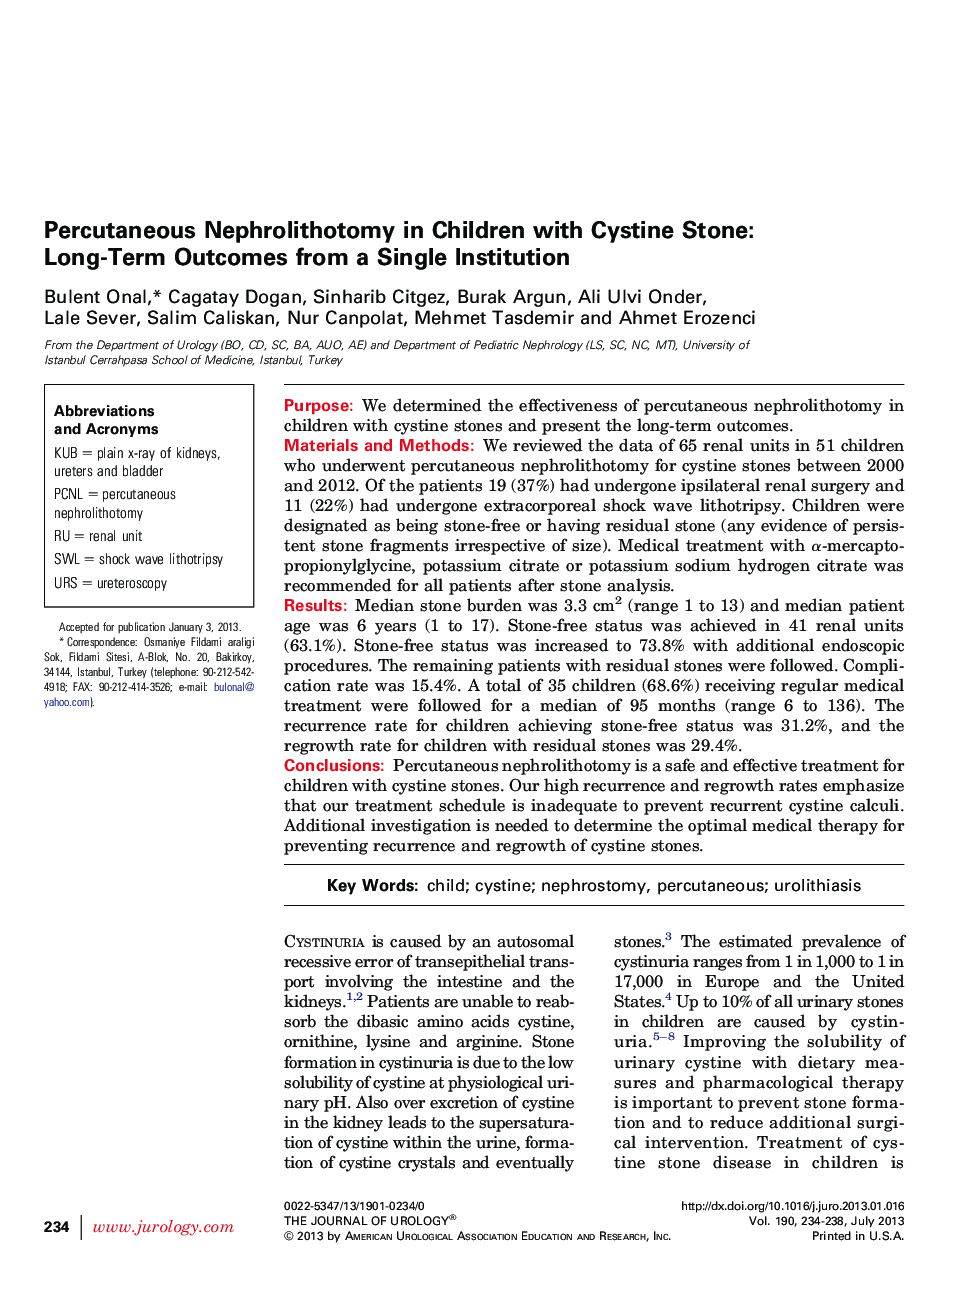 Percutaneous Nephrolithotomy in Children with Cystine Stone: Long-Term Outcomes from a Single Institution